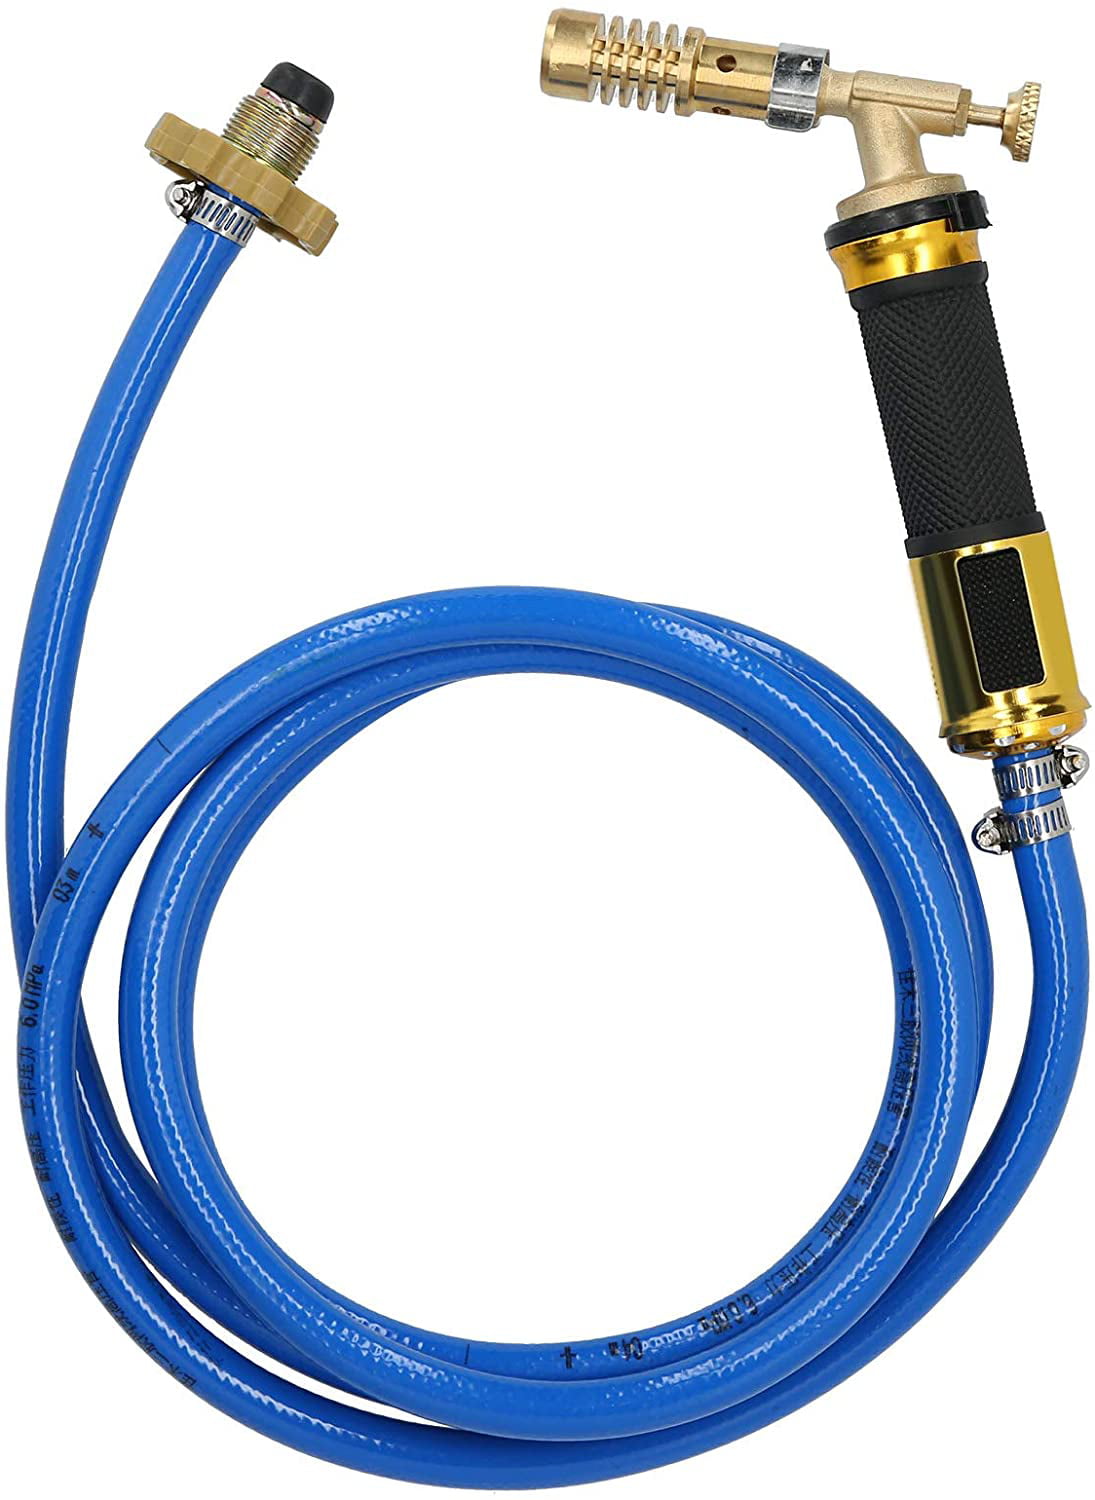 Quick Heat Propane Hose Brazing Torch Turbo Welding Torch Air Conditioning for Pipelines Heating Cooling 